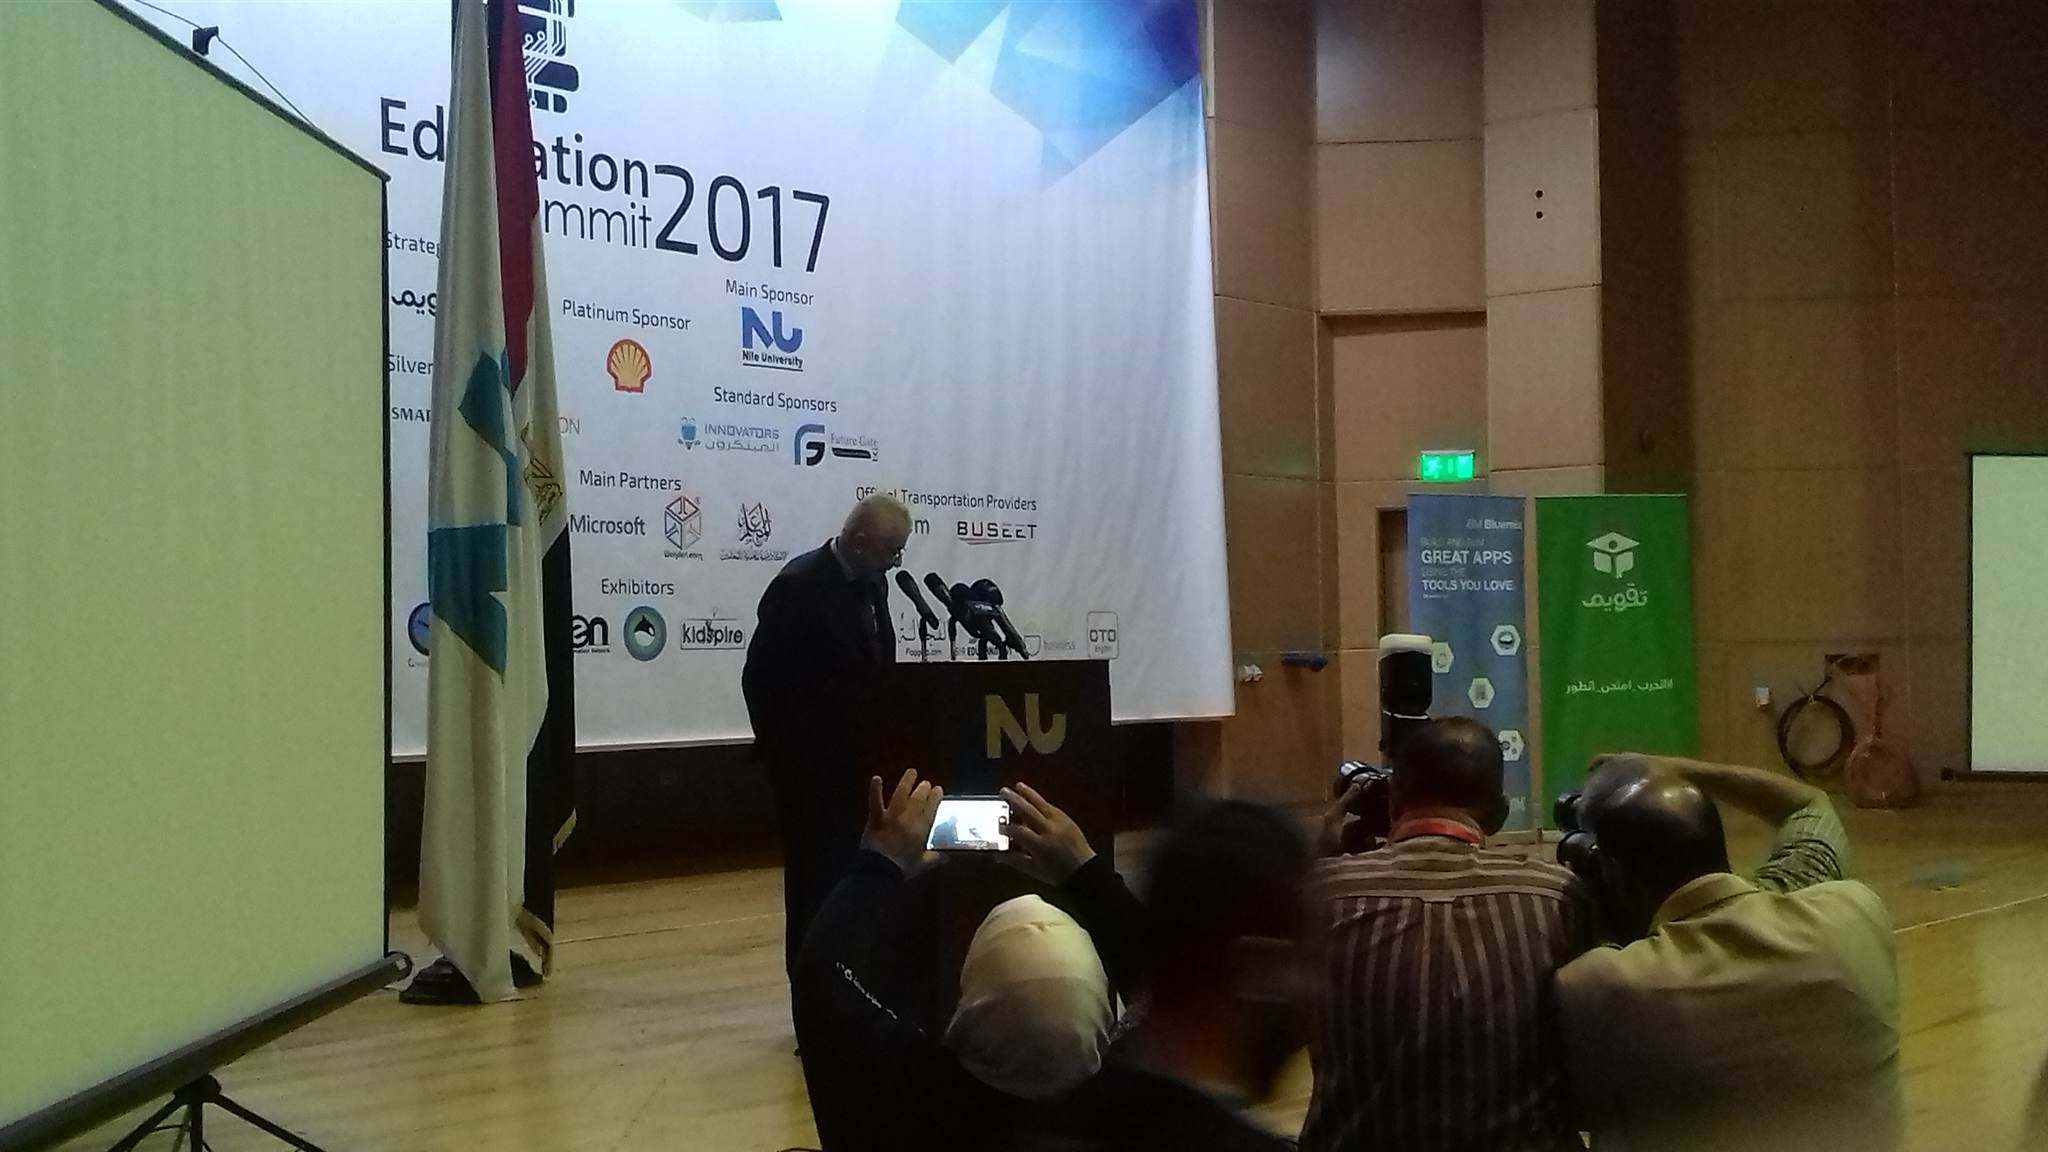 Moataz Darwish: Eduvation Summit is An Important Platform for Awareness Dissemination of Using Technology in the Educational Development Process